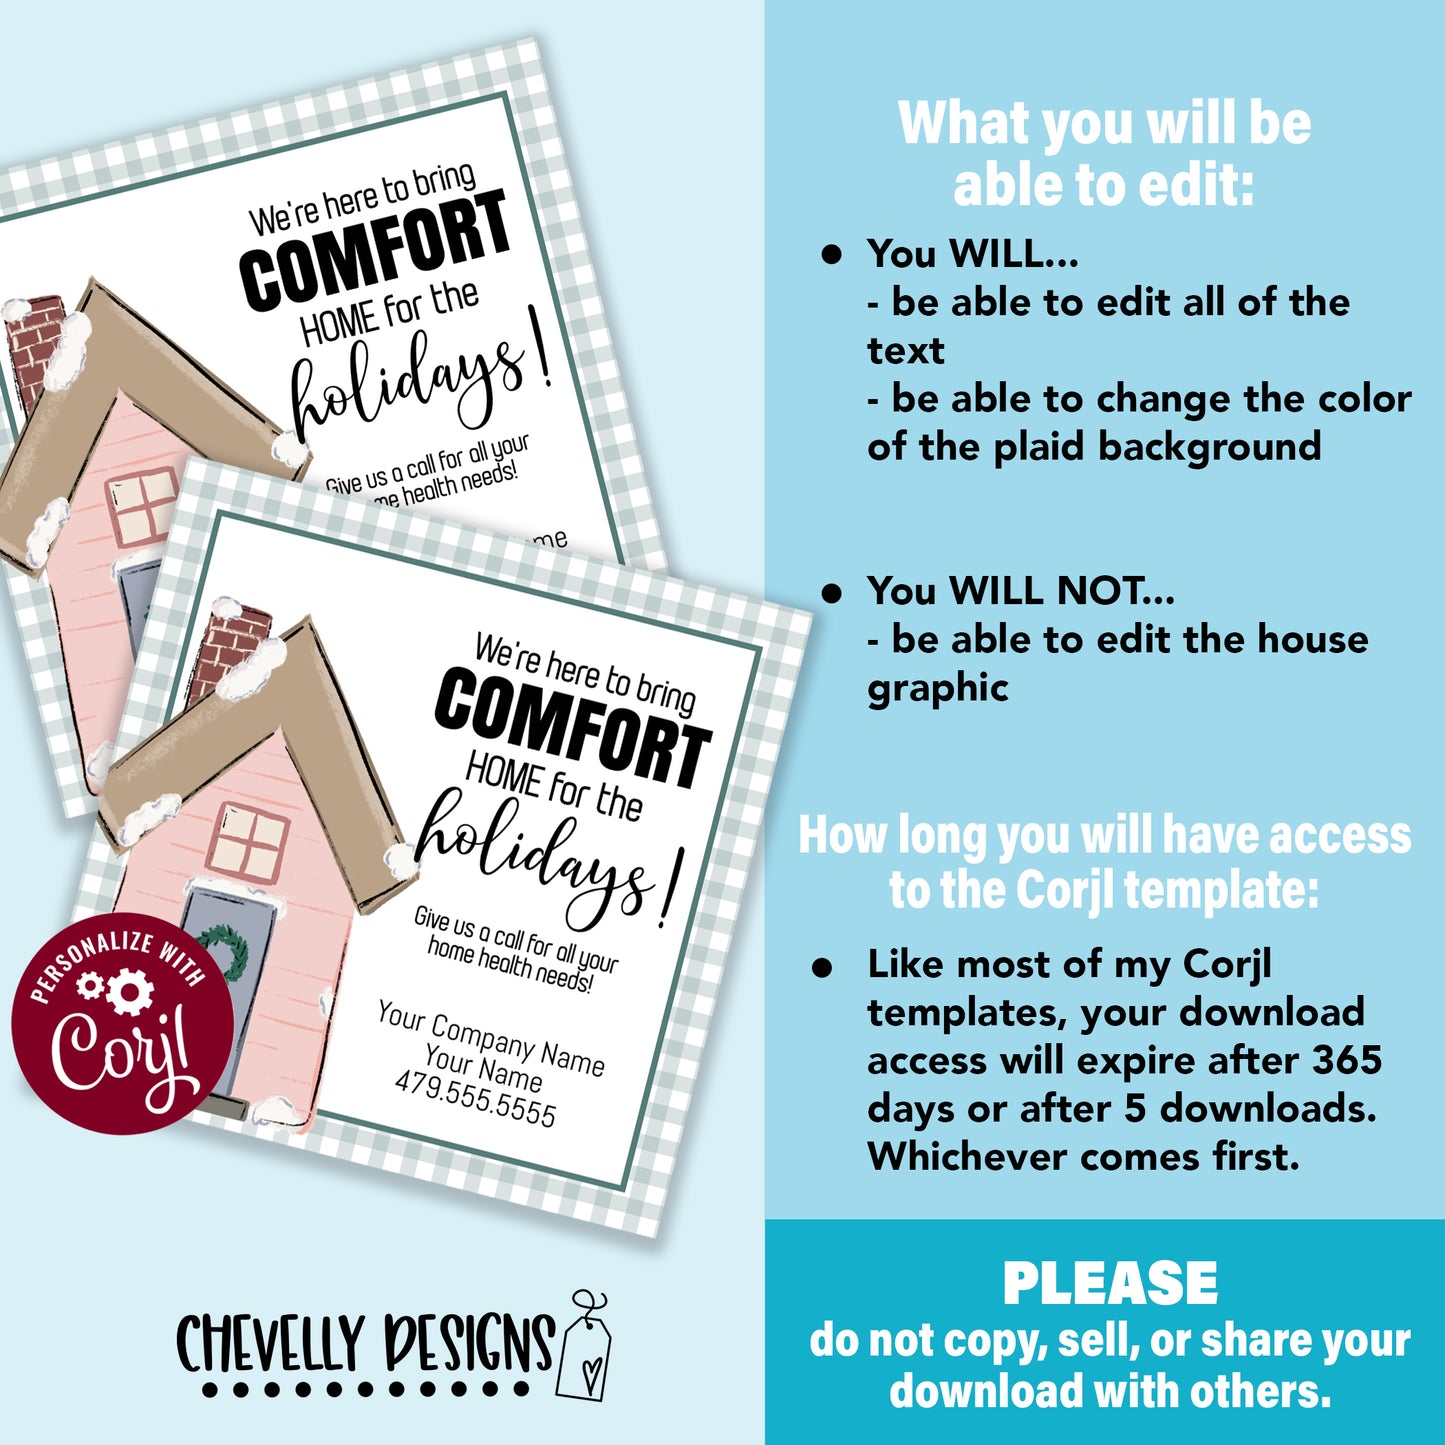 EDITABLE - Bring Comfort Home for the Holidays - Home Health Referral Gift Tags - Printable Digital File